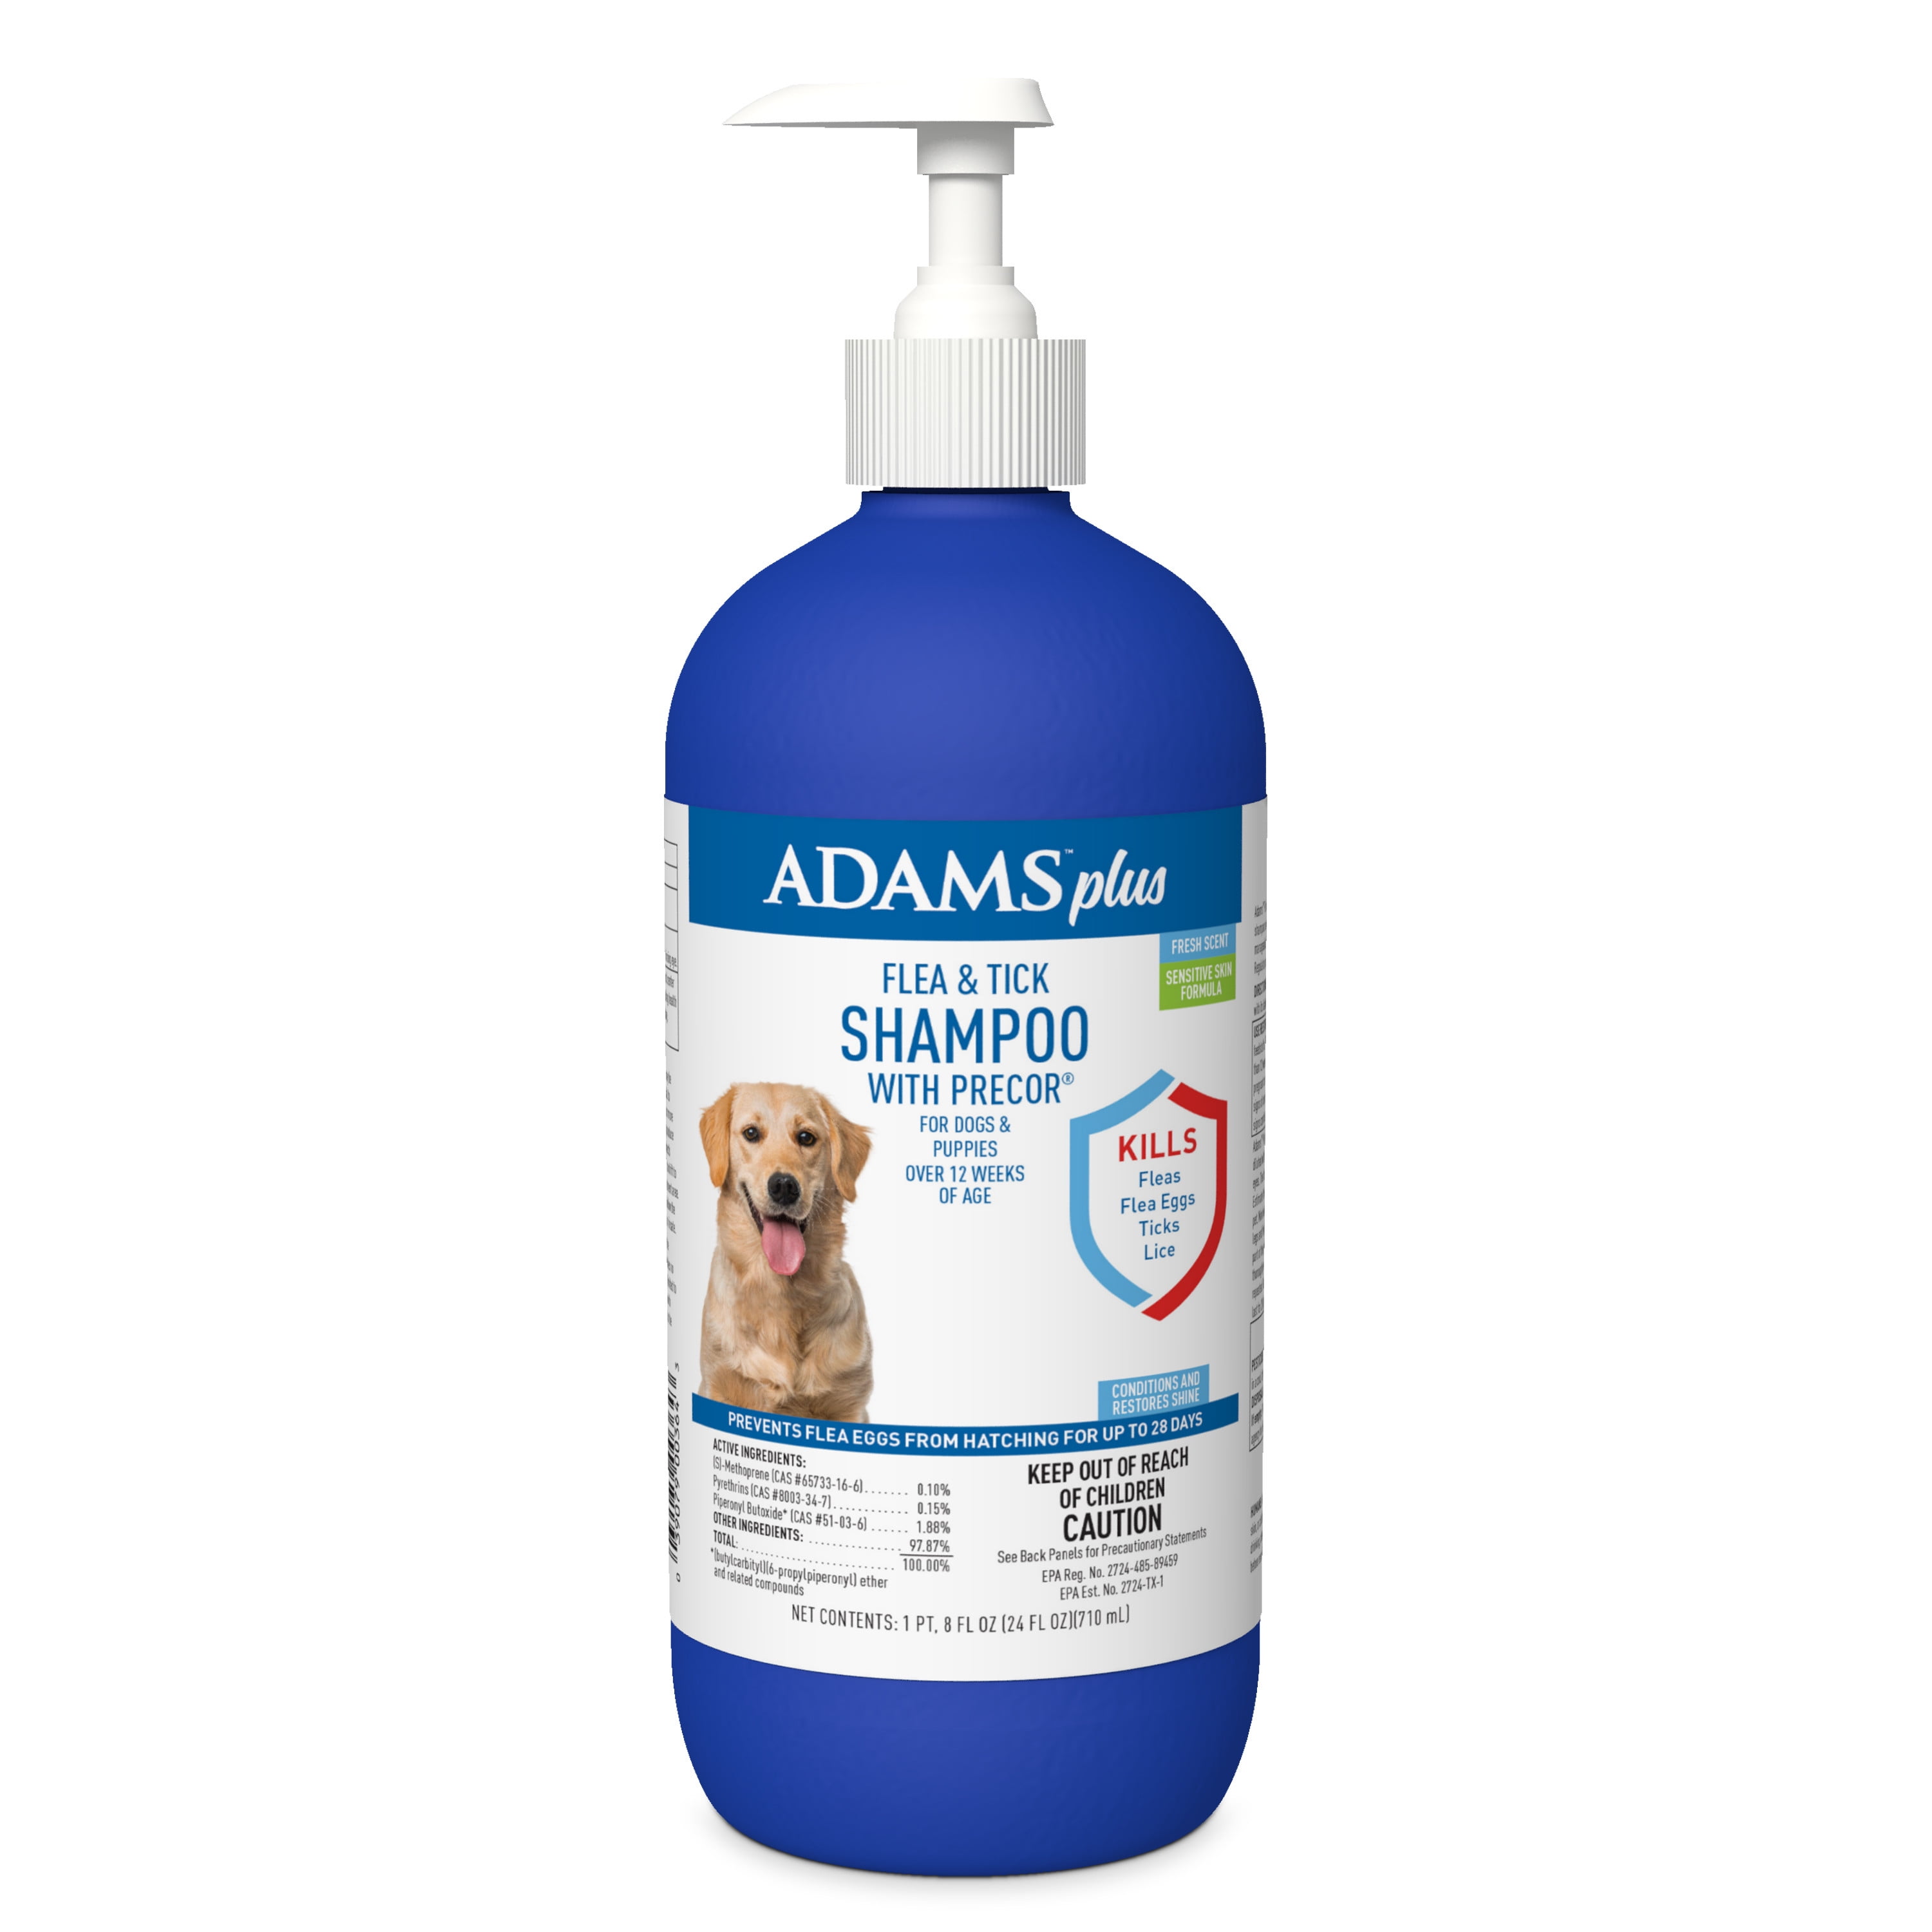 Adams Plus Flea & Tick Shampoo with Precor for Dogs & Puppies Over 12 Weeks Of Age | 24 Oz